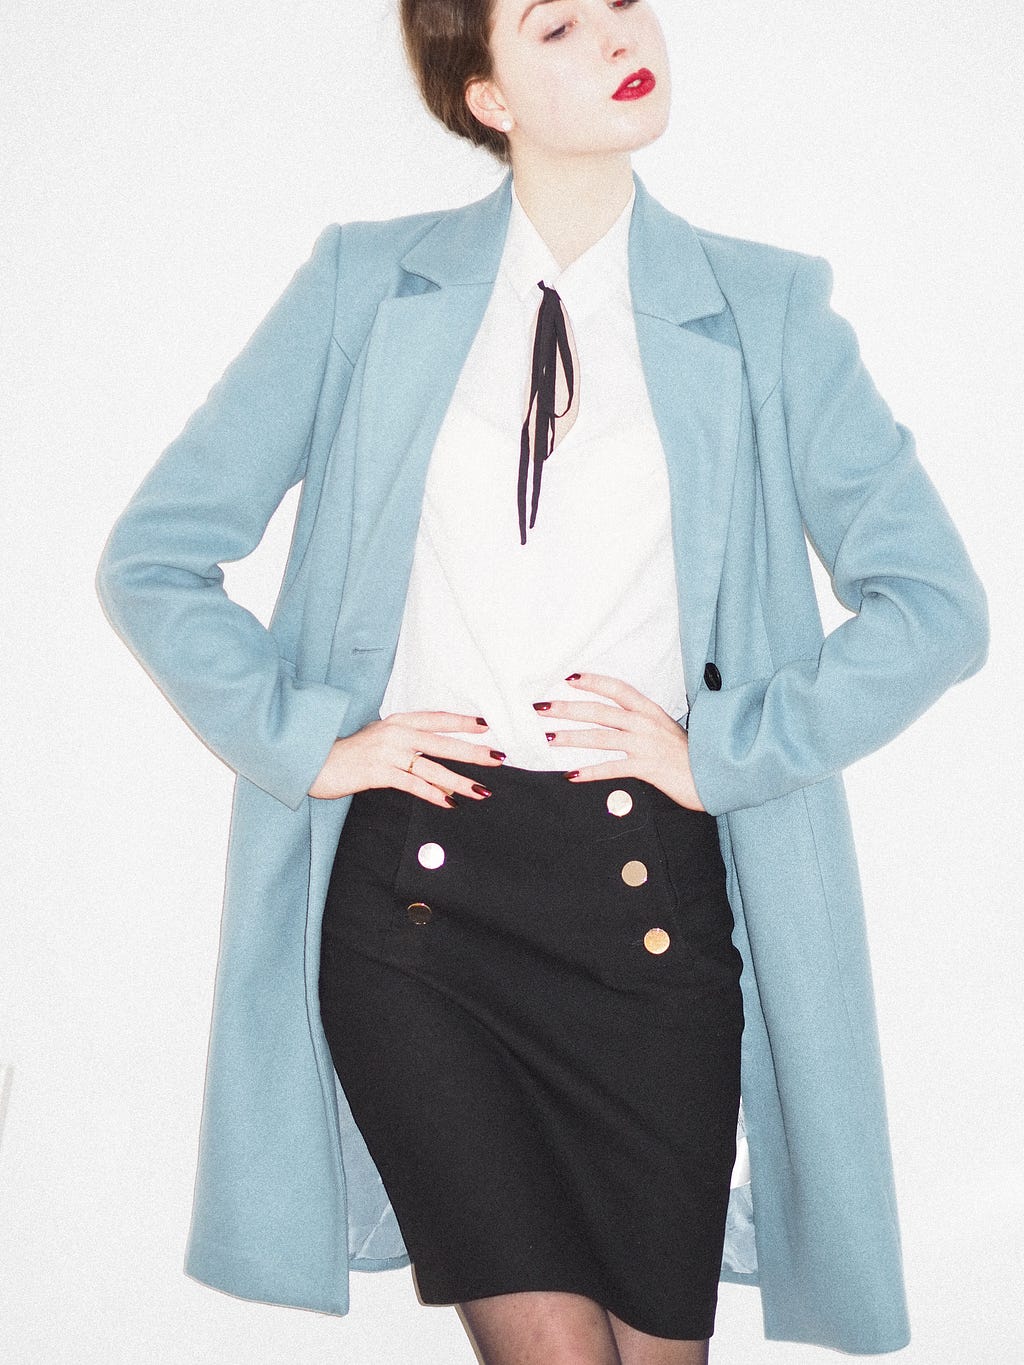 a confident young woman poses in a blue jacket